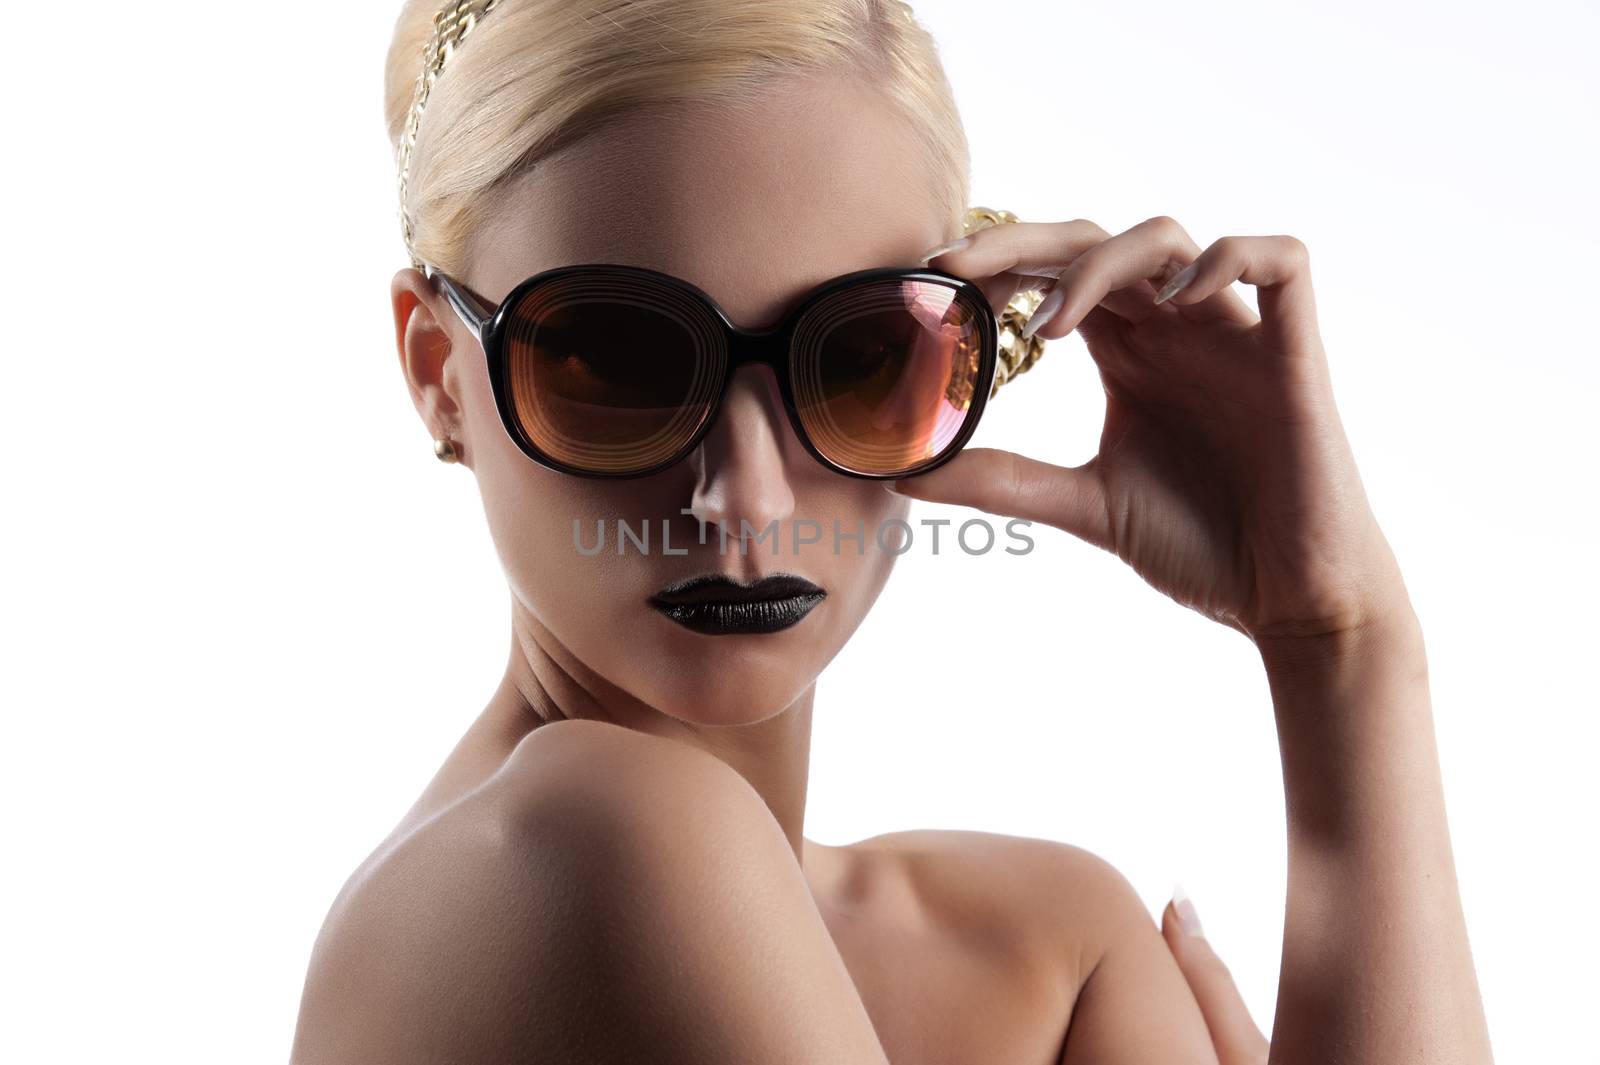 fashion shot of blond girl with golden sunglasses by fotoCD